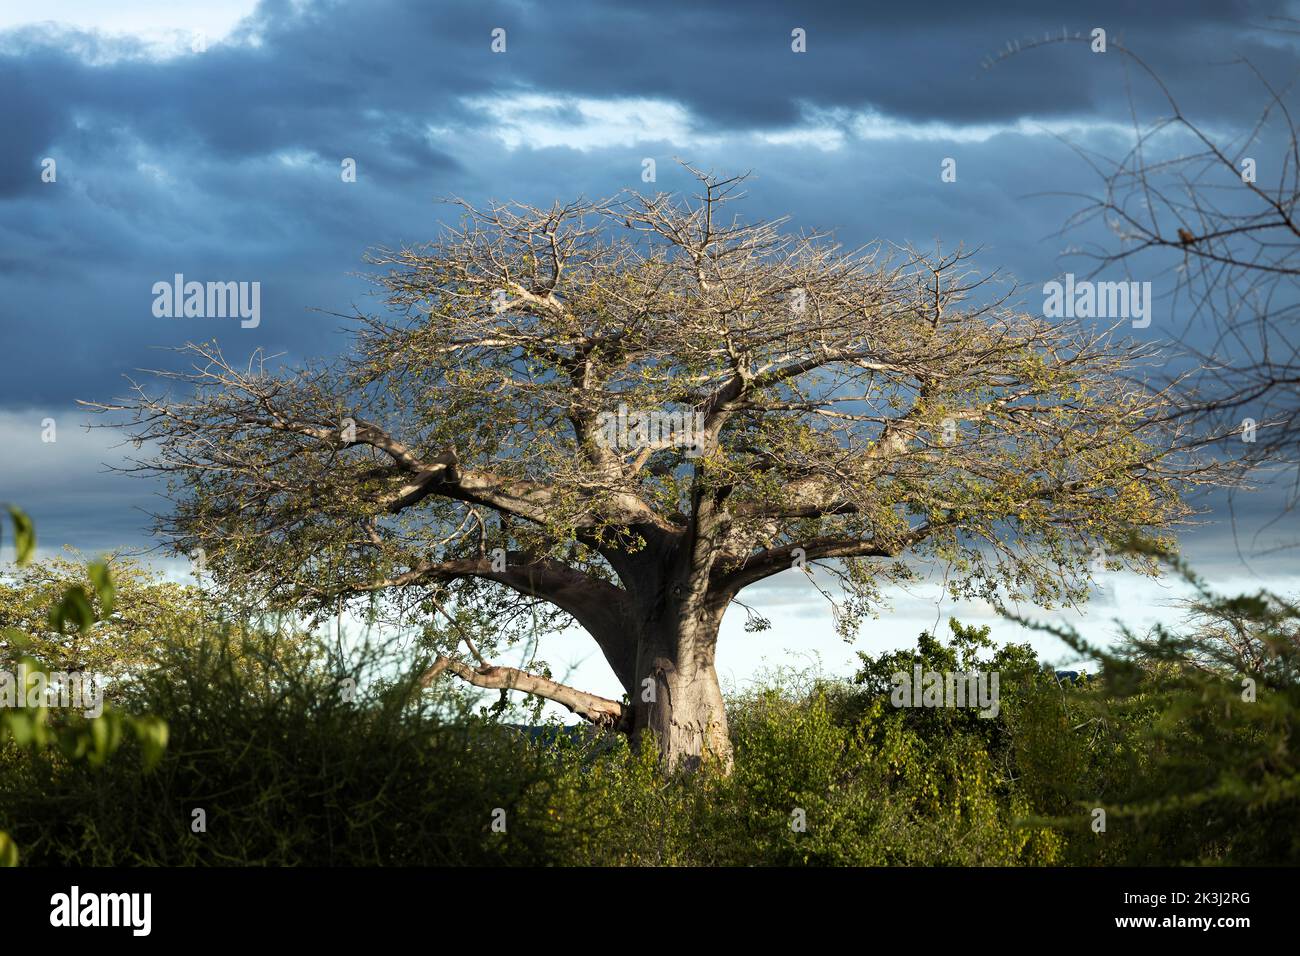 An ancient Baobab dwarfs the surrounding vegetation. Often these massive trees are significant landmarks in the surrounding arid bush. Stock Photo